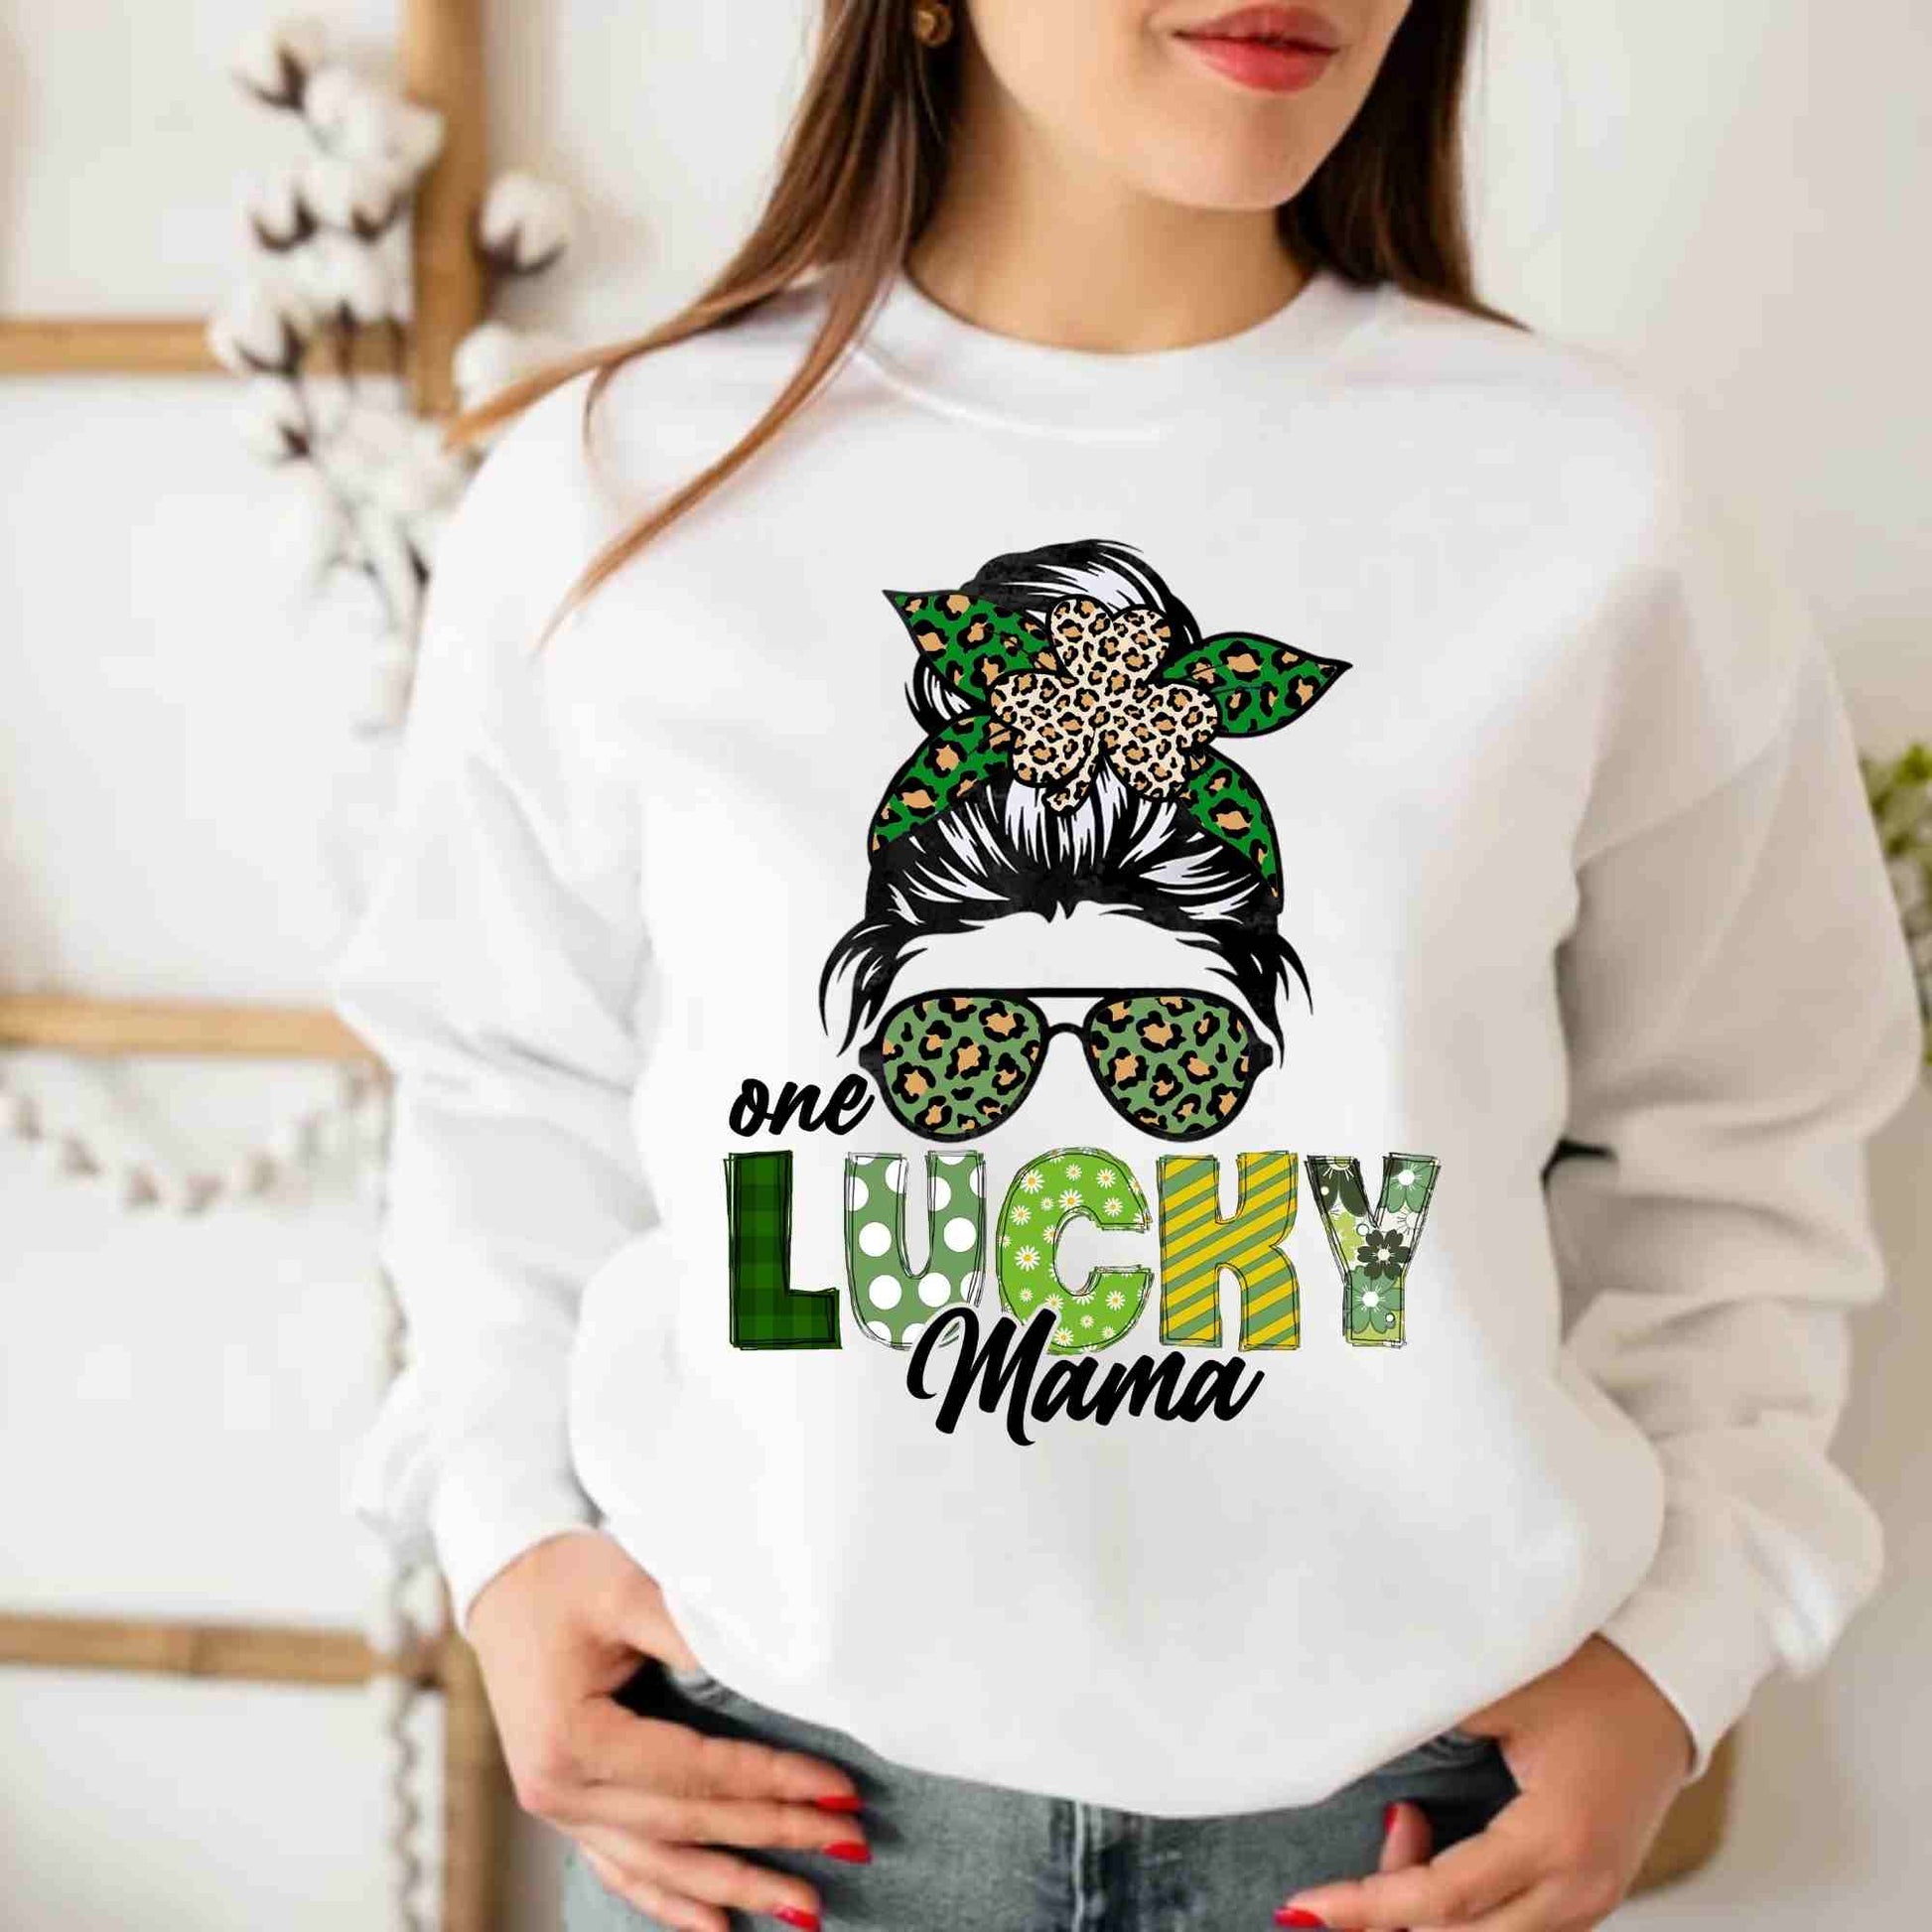 One Lucky Mama St. Patrick's Day Shirt, Happy St. Patrick's Day Mom Shirt, Shamrock Clover Shirt